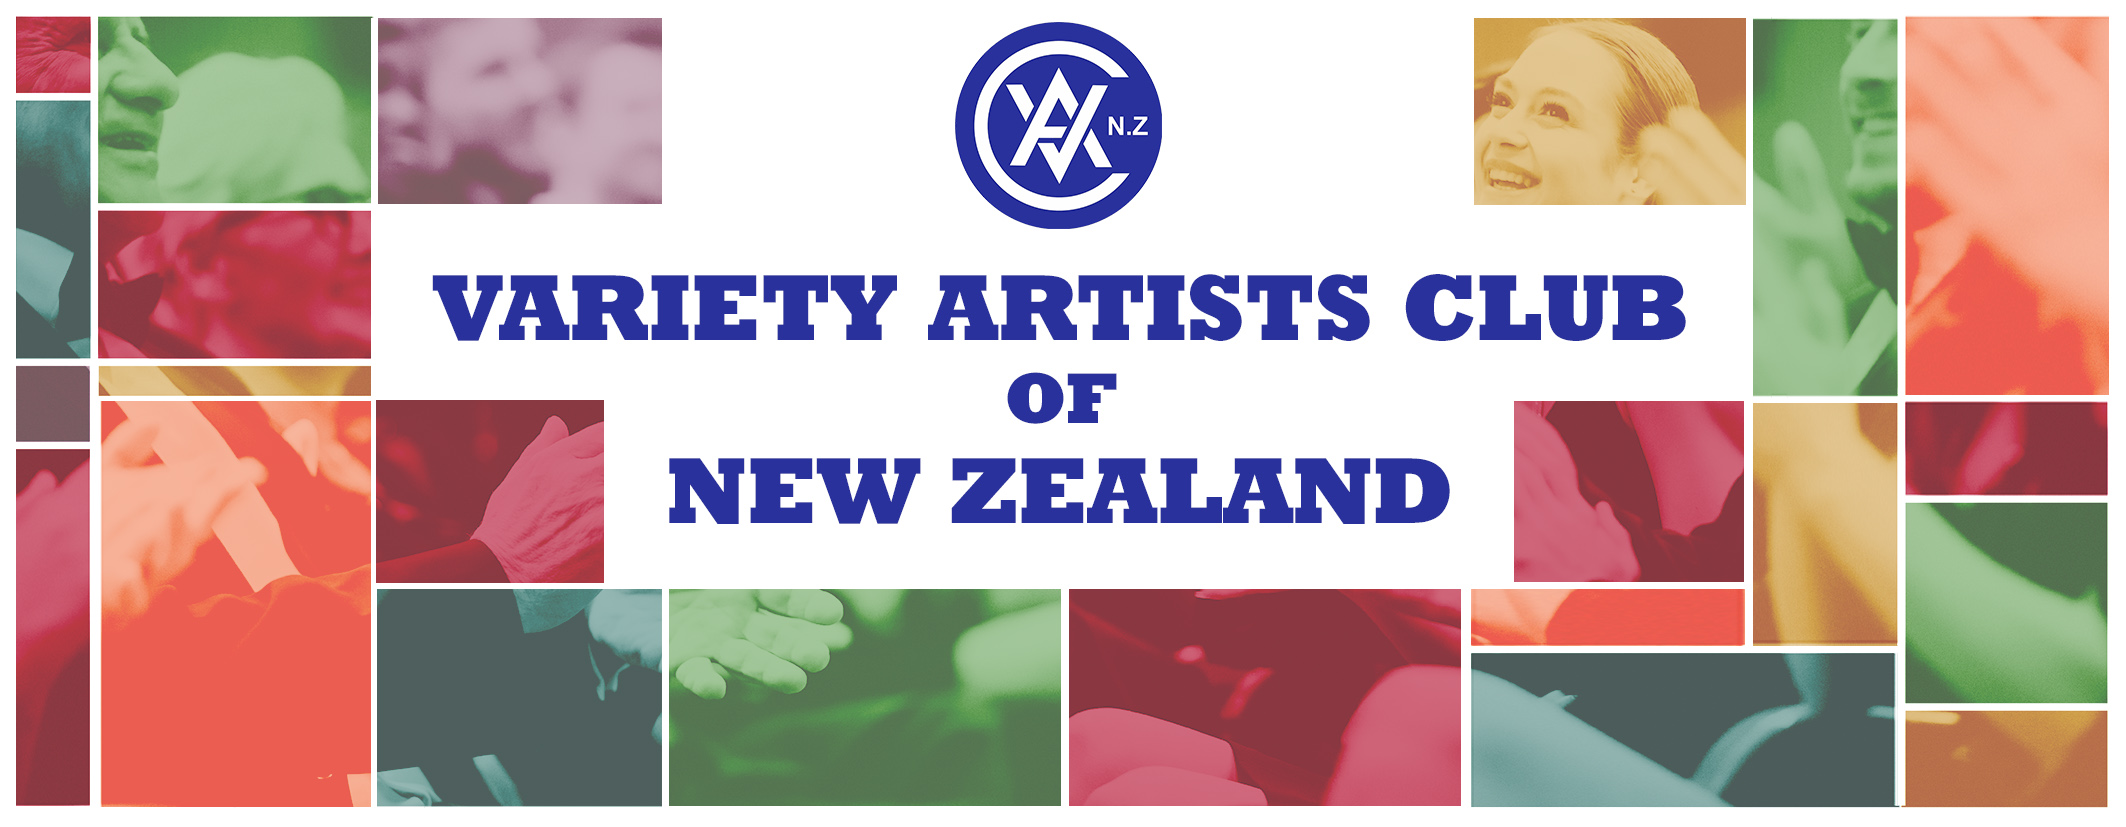 Variety Artists Club of New Zealand Inc